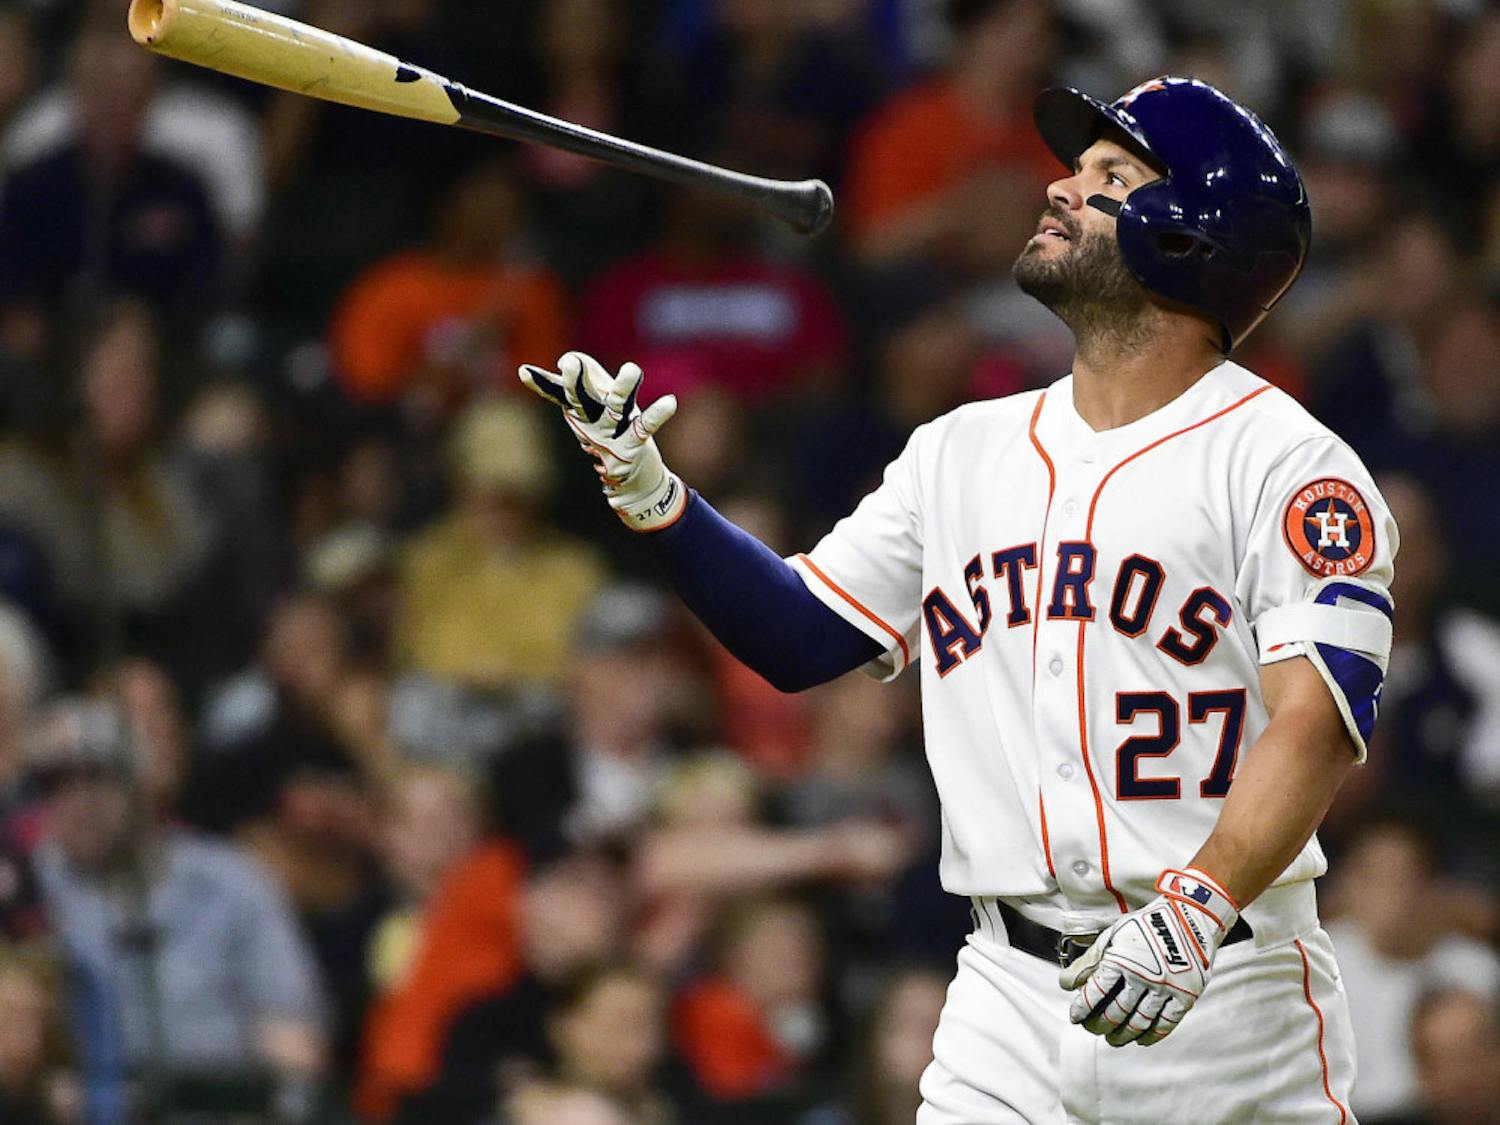 Houston Astros' Jose Altuve flips his bat after striking out in the third inning of a baseball game against the Seattle Mariners, Wednesday, April 5, 2017, in Houston. (AP Photo/Eric Christian Smith)